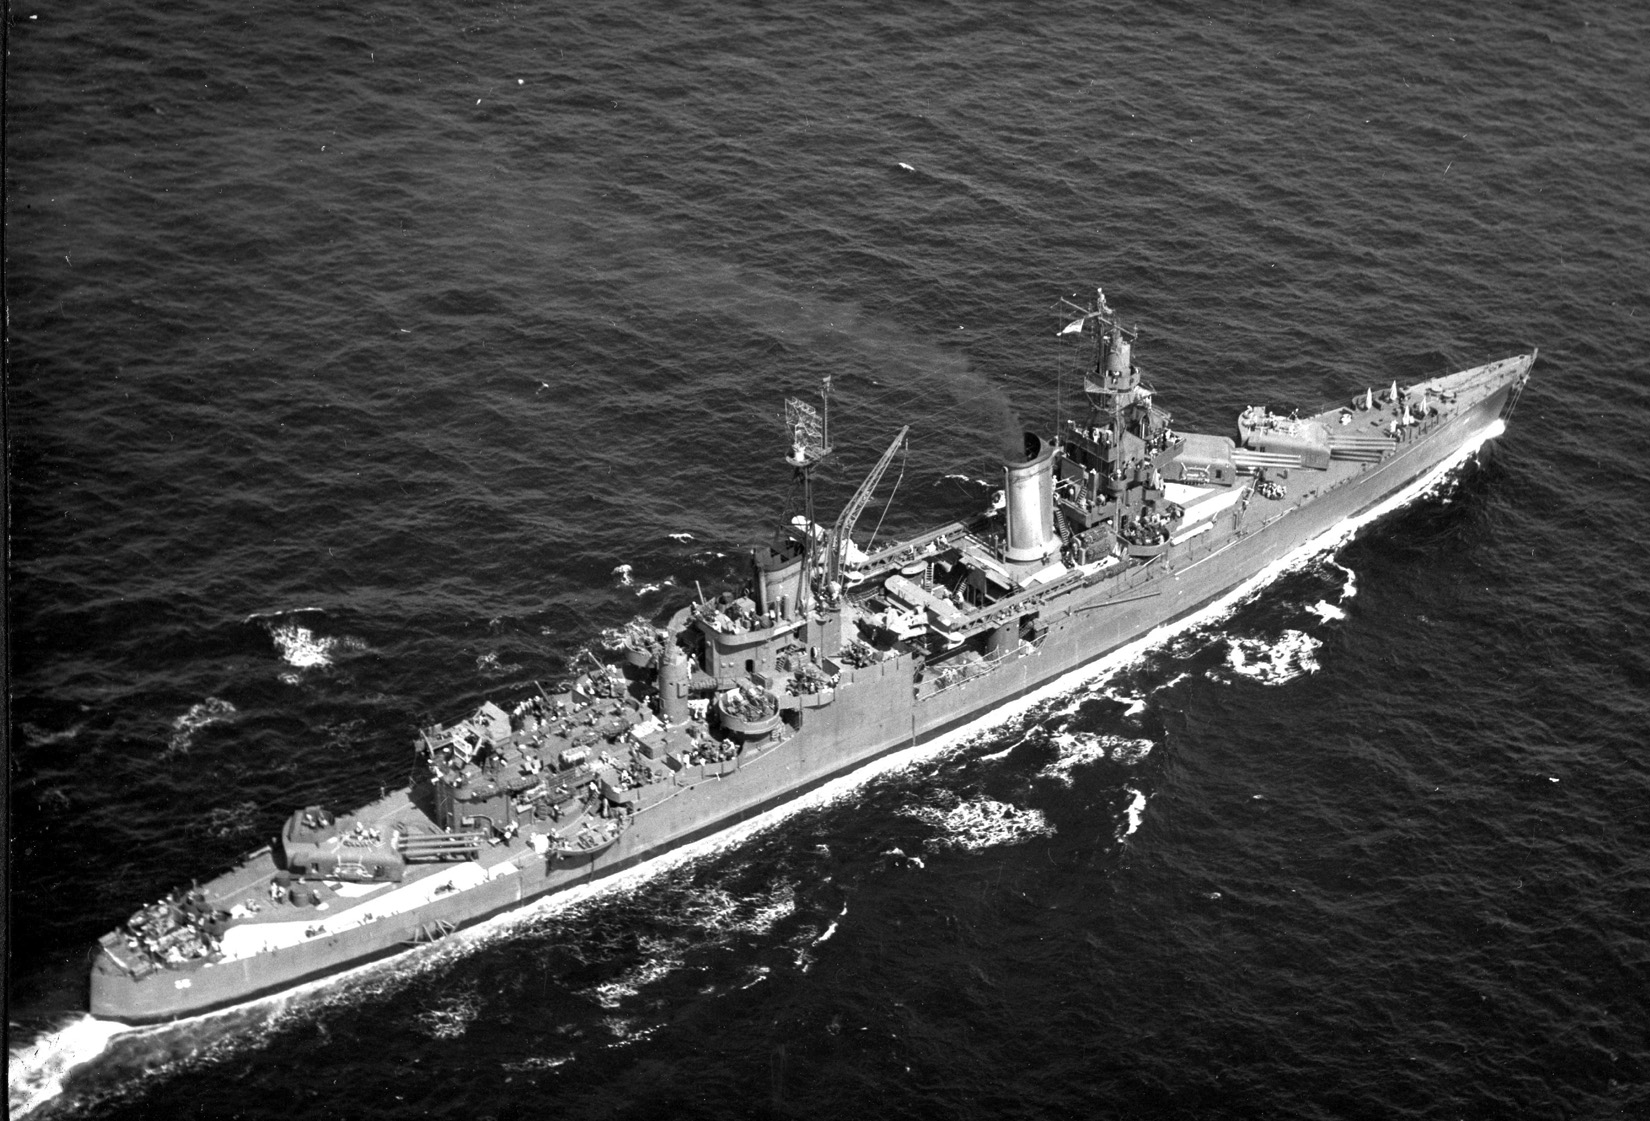 The USS Indianapolis (CA-35) sailing in 1943 or 1944. After the incident, only 317 men out of a total crew of 1,196 survived, making the incident the worst naval disaster in U.S. Navy history. 